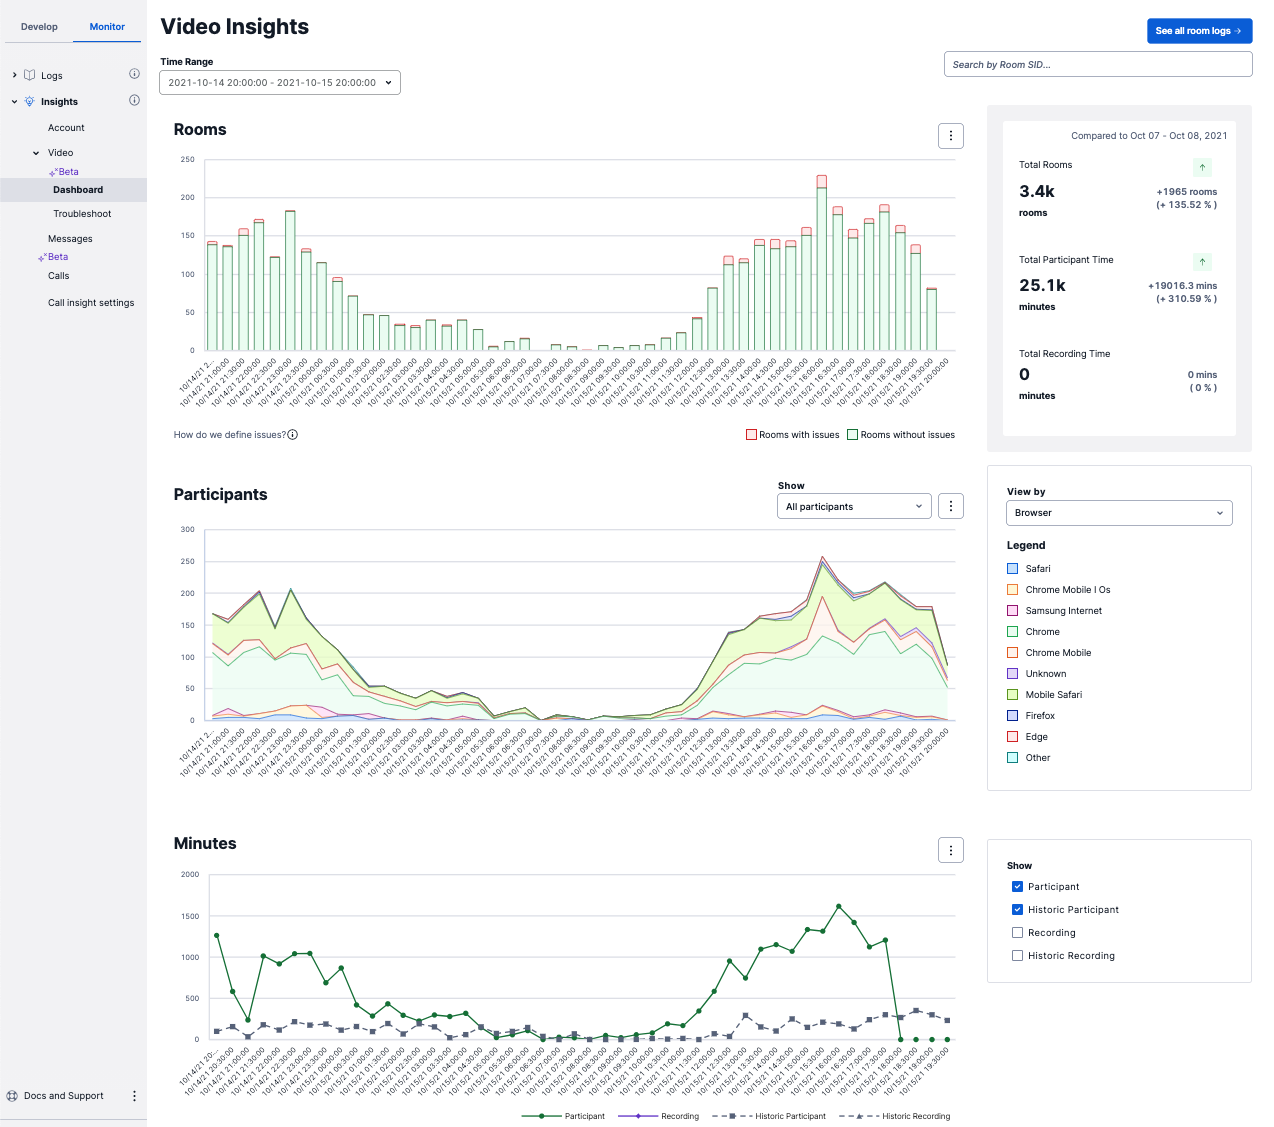 Video Insights Dashboard Overview.